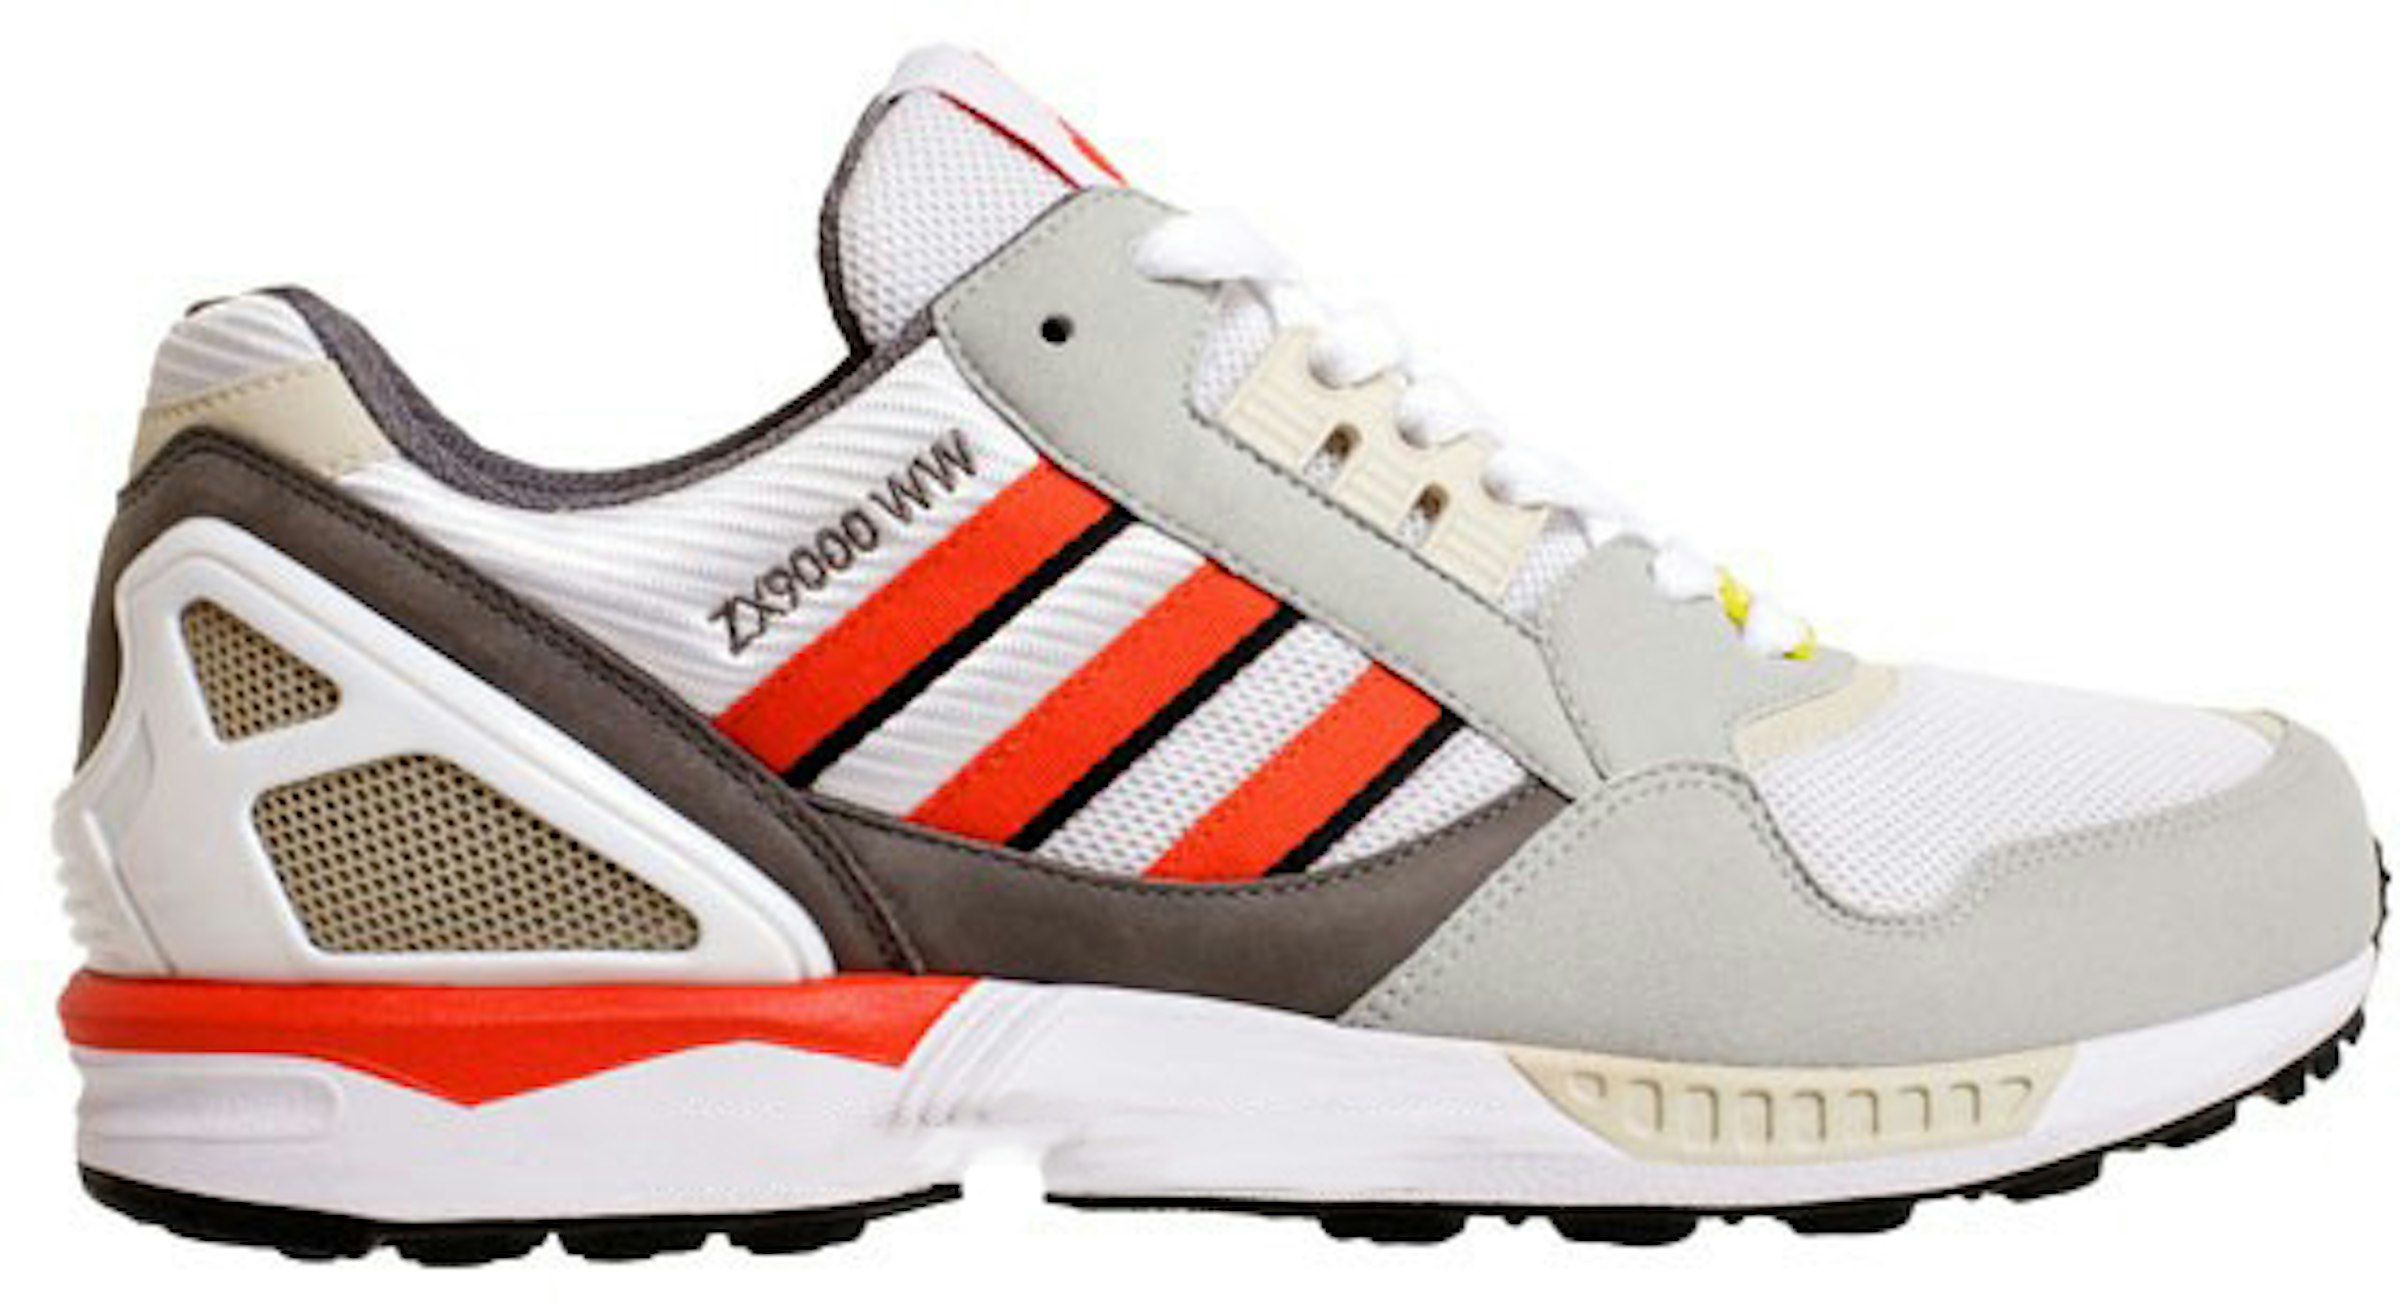 Cuyo diferente a inferencia adidas ZX 9000 Wood Wood Men's - 361055 - US